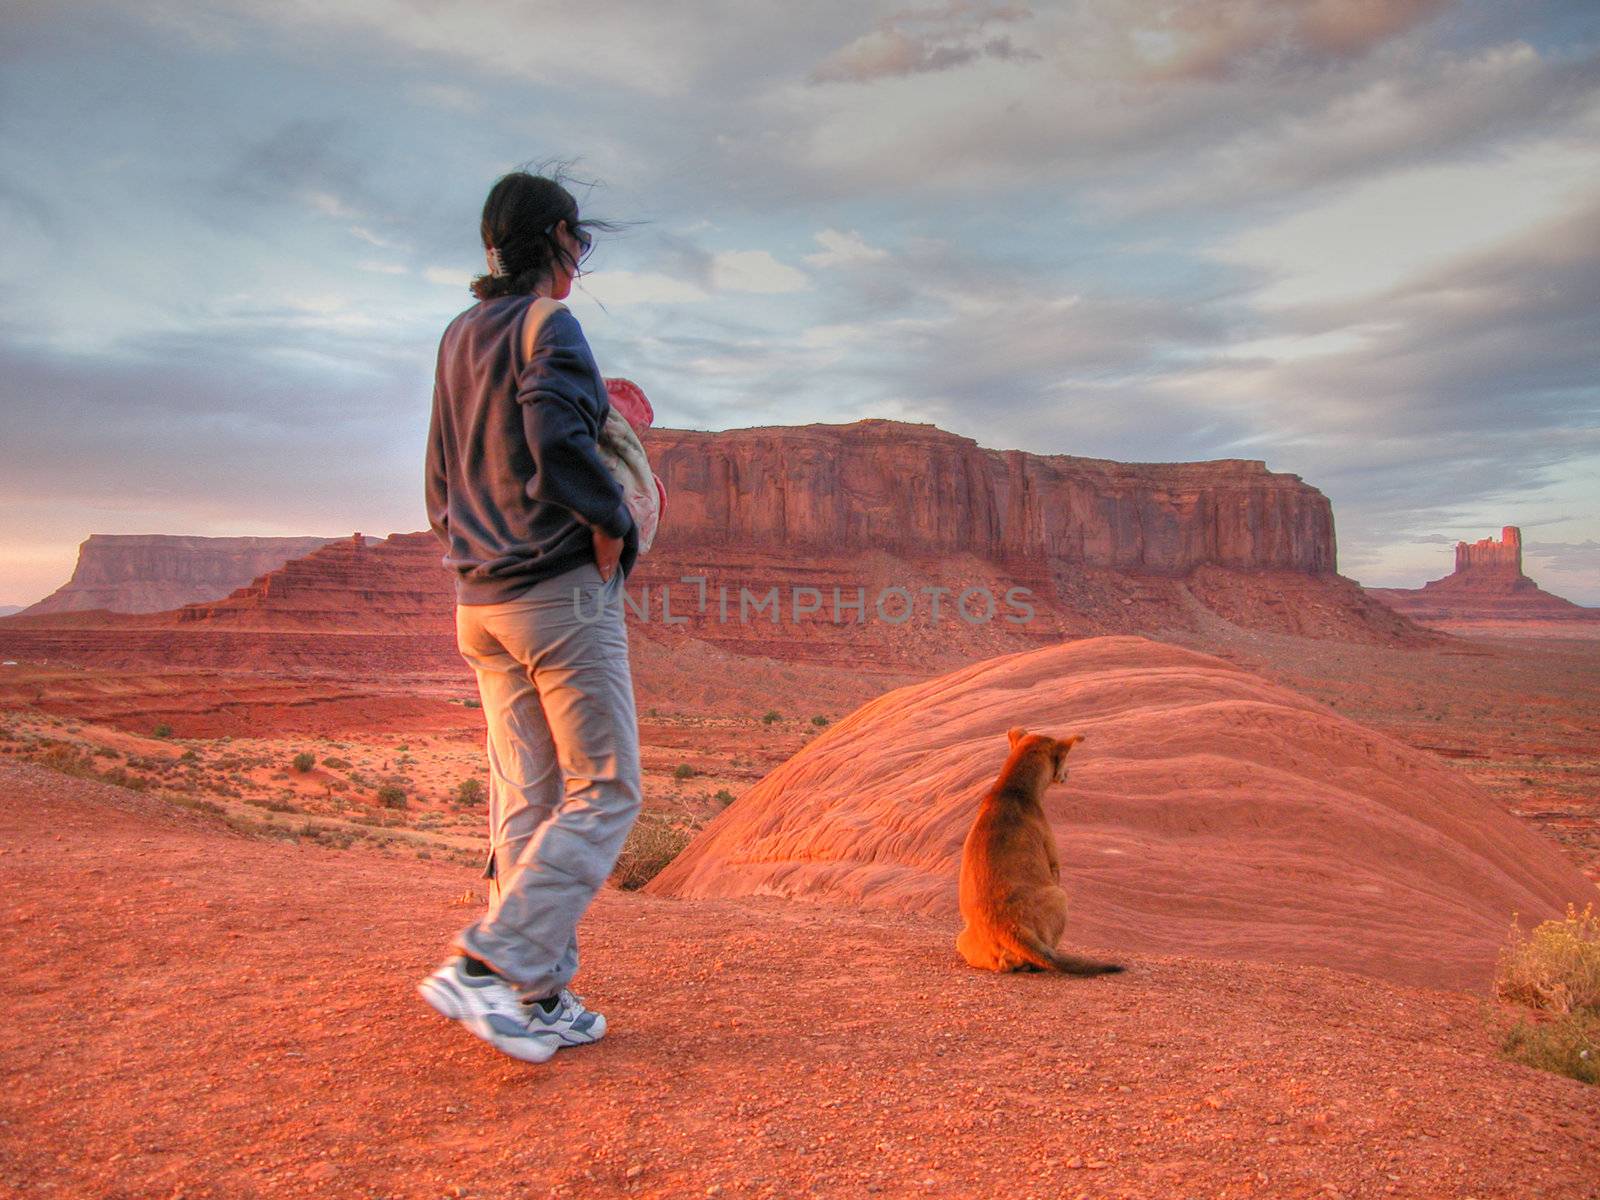 A girl and her dog watching sunset in Monument Valley